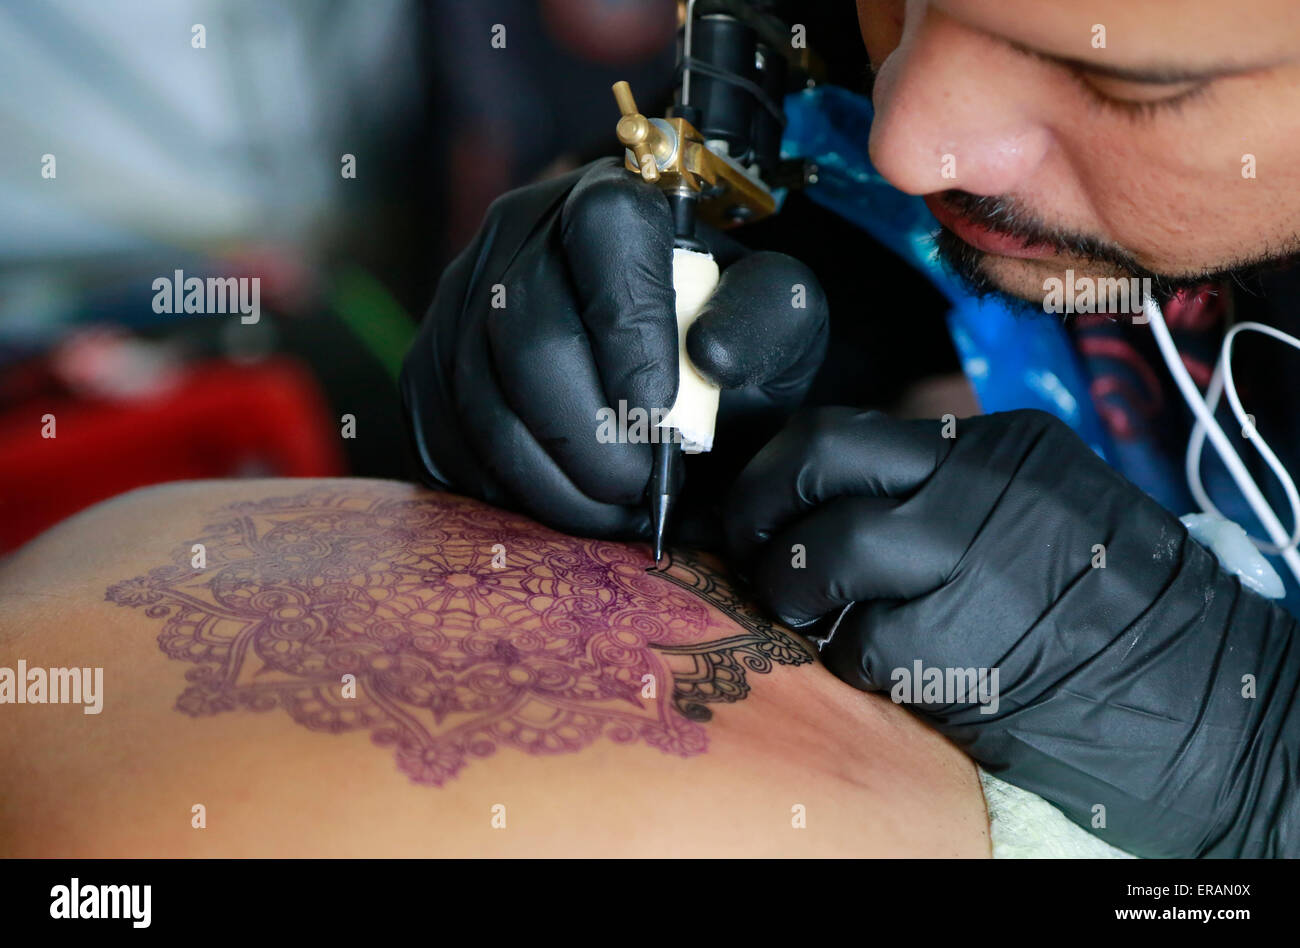 Crowds throng 2019 Houston Tattoo Arts Convention